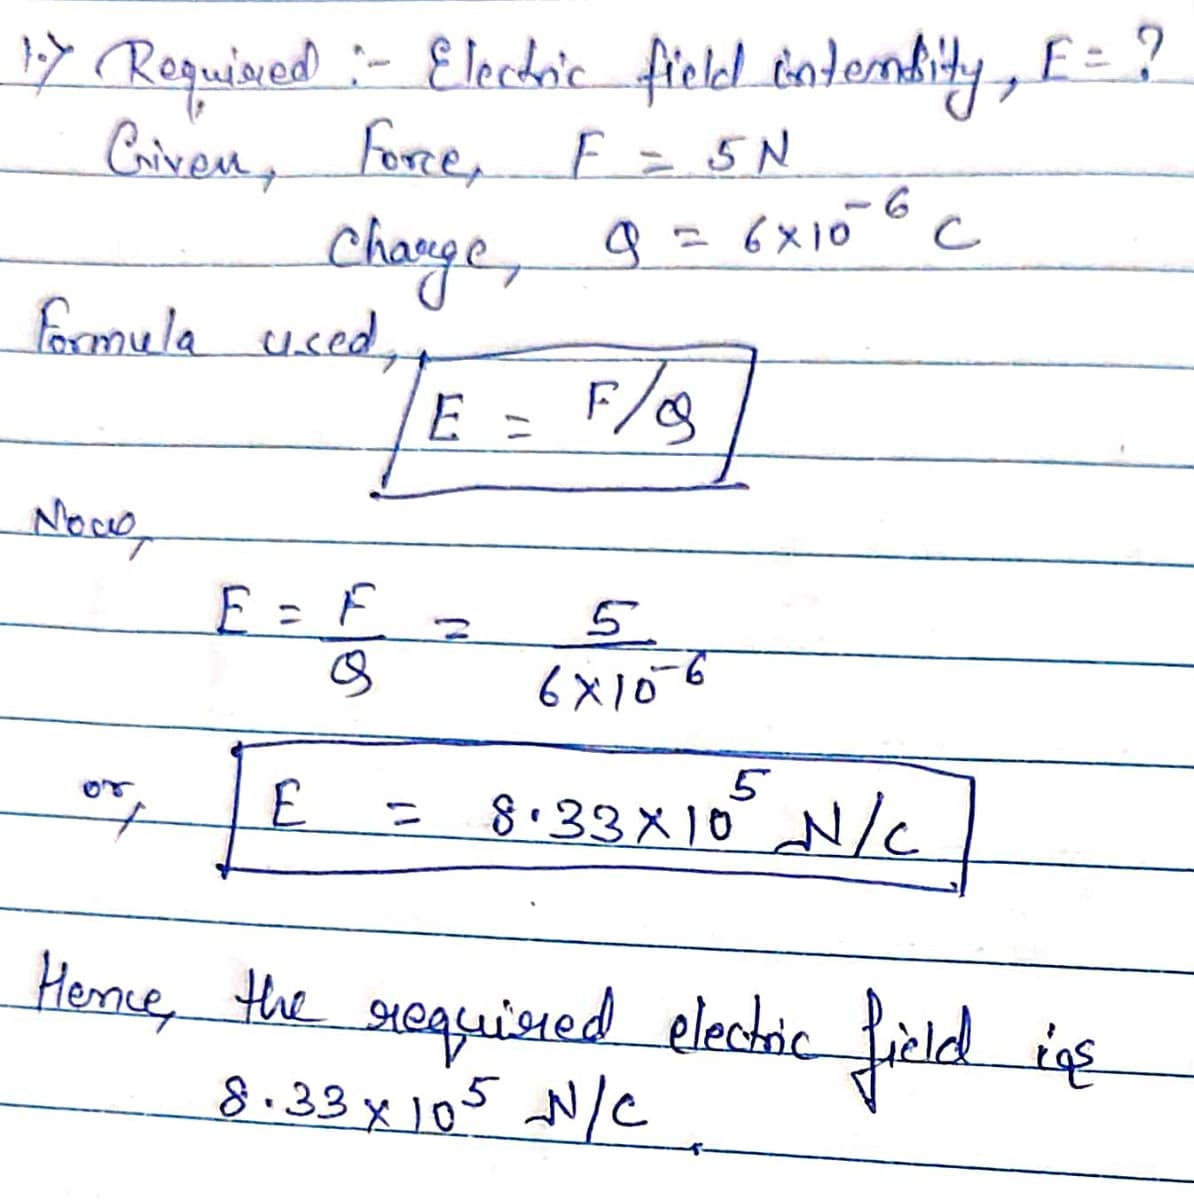 F
1-7 Required :- Electric field intensity, E= ?
Criven, Force, F = 5N
Change, 9 = 6×10 6 c
Formula used,
E = F/8
Now,
E = F
5.
6×106
05
E = 8.33×105 N/C
Hence, the required electric field ins
8.33× 105 N/C